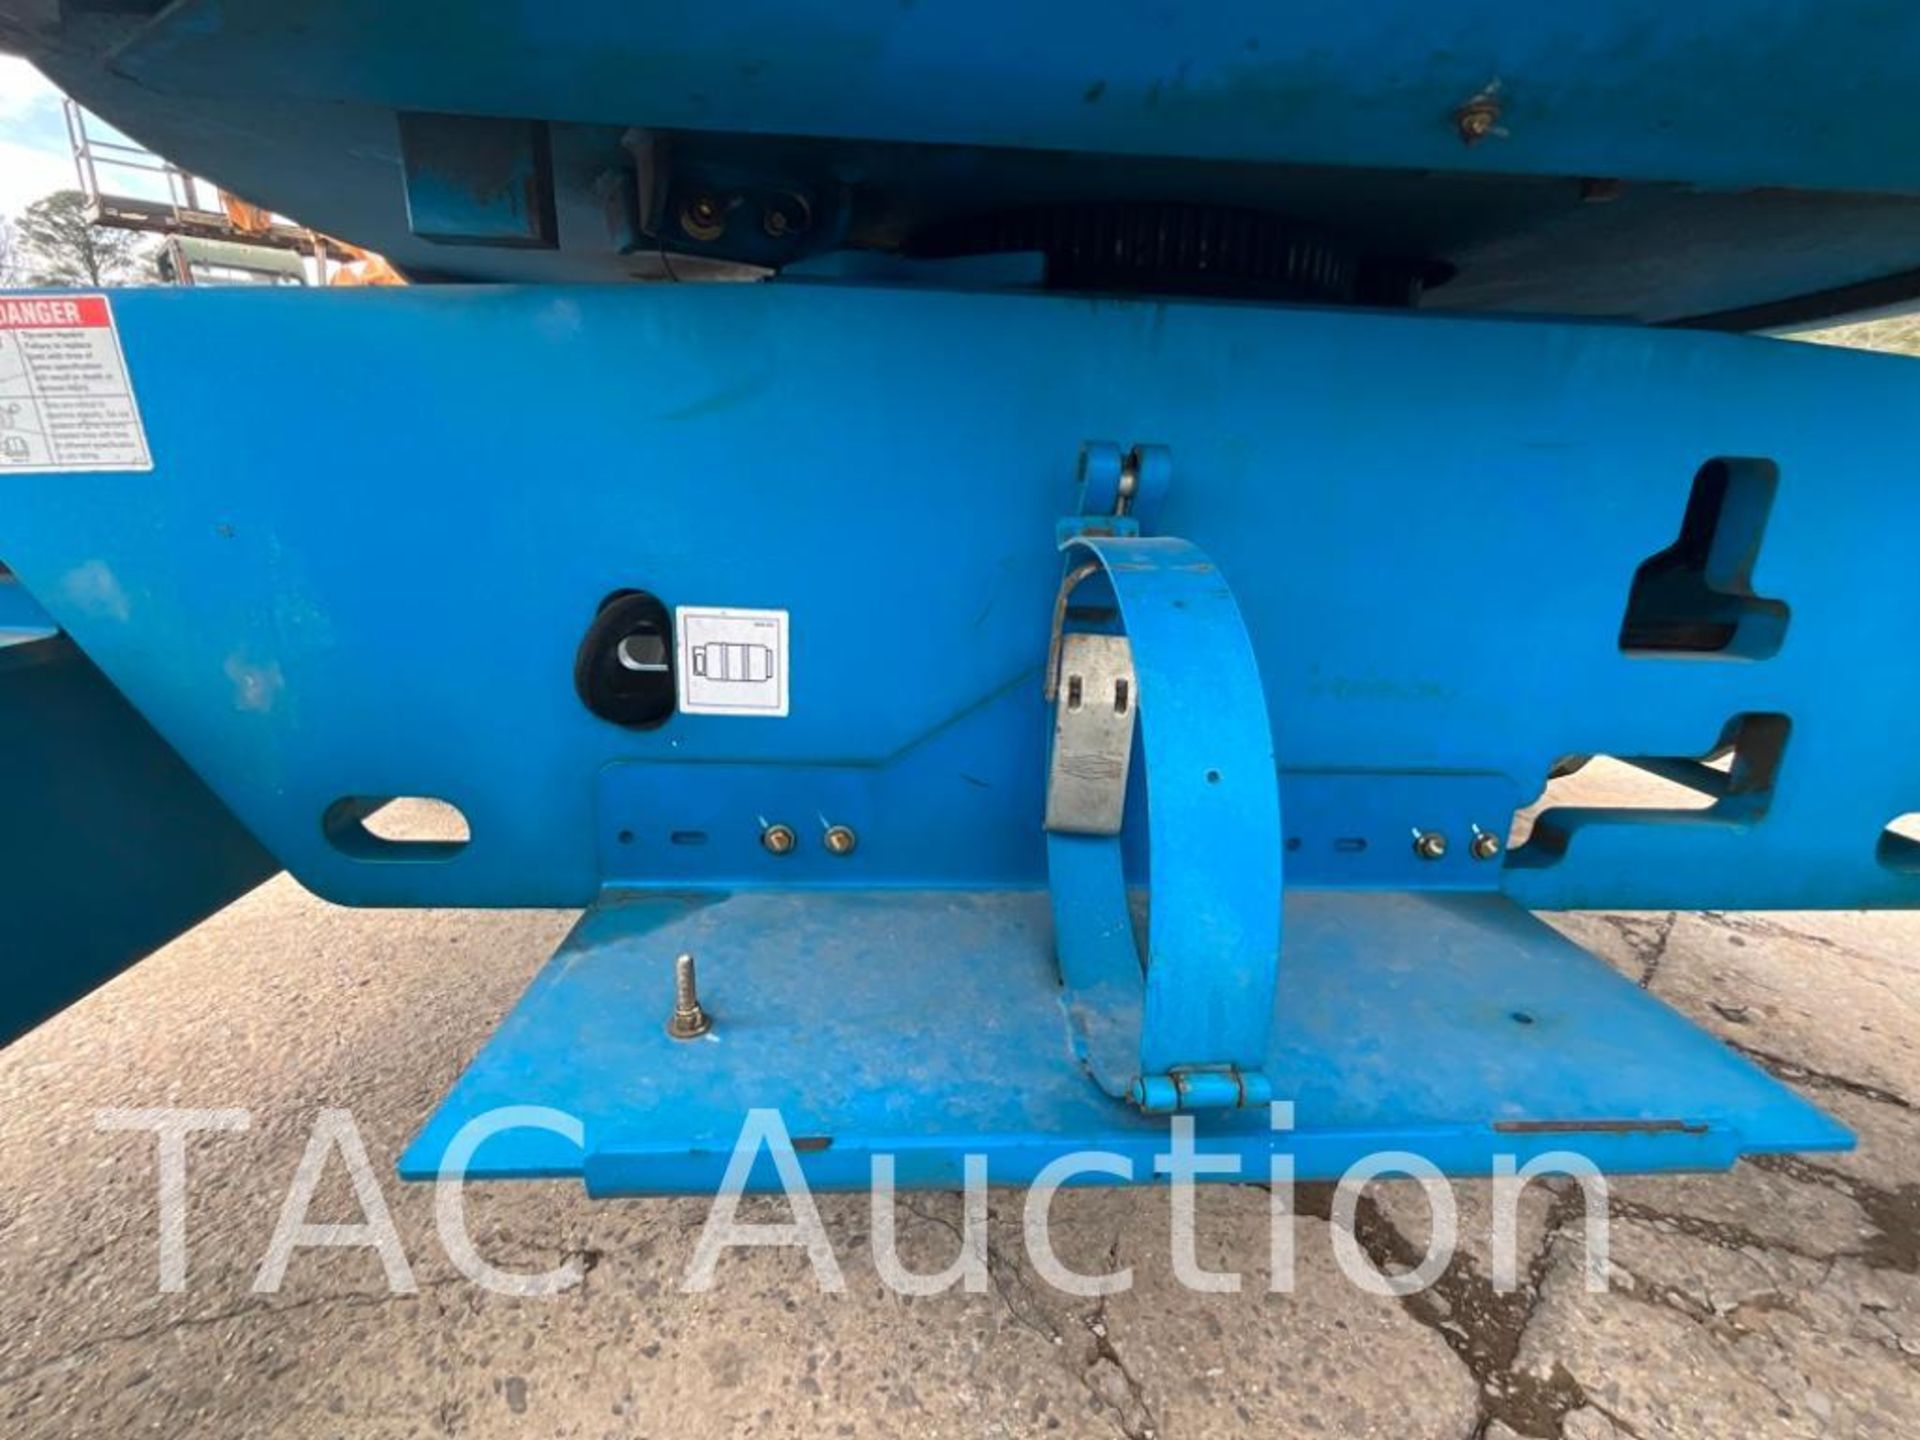 2012 Genie Z45/25J RT 4X4 Articulated Boom Lift - Image 12 of 51